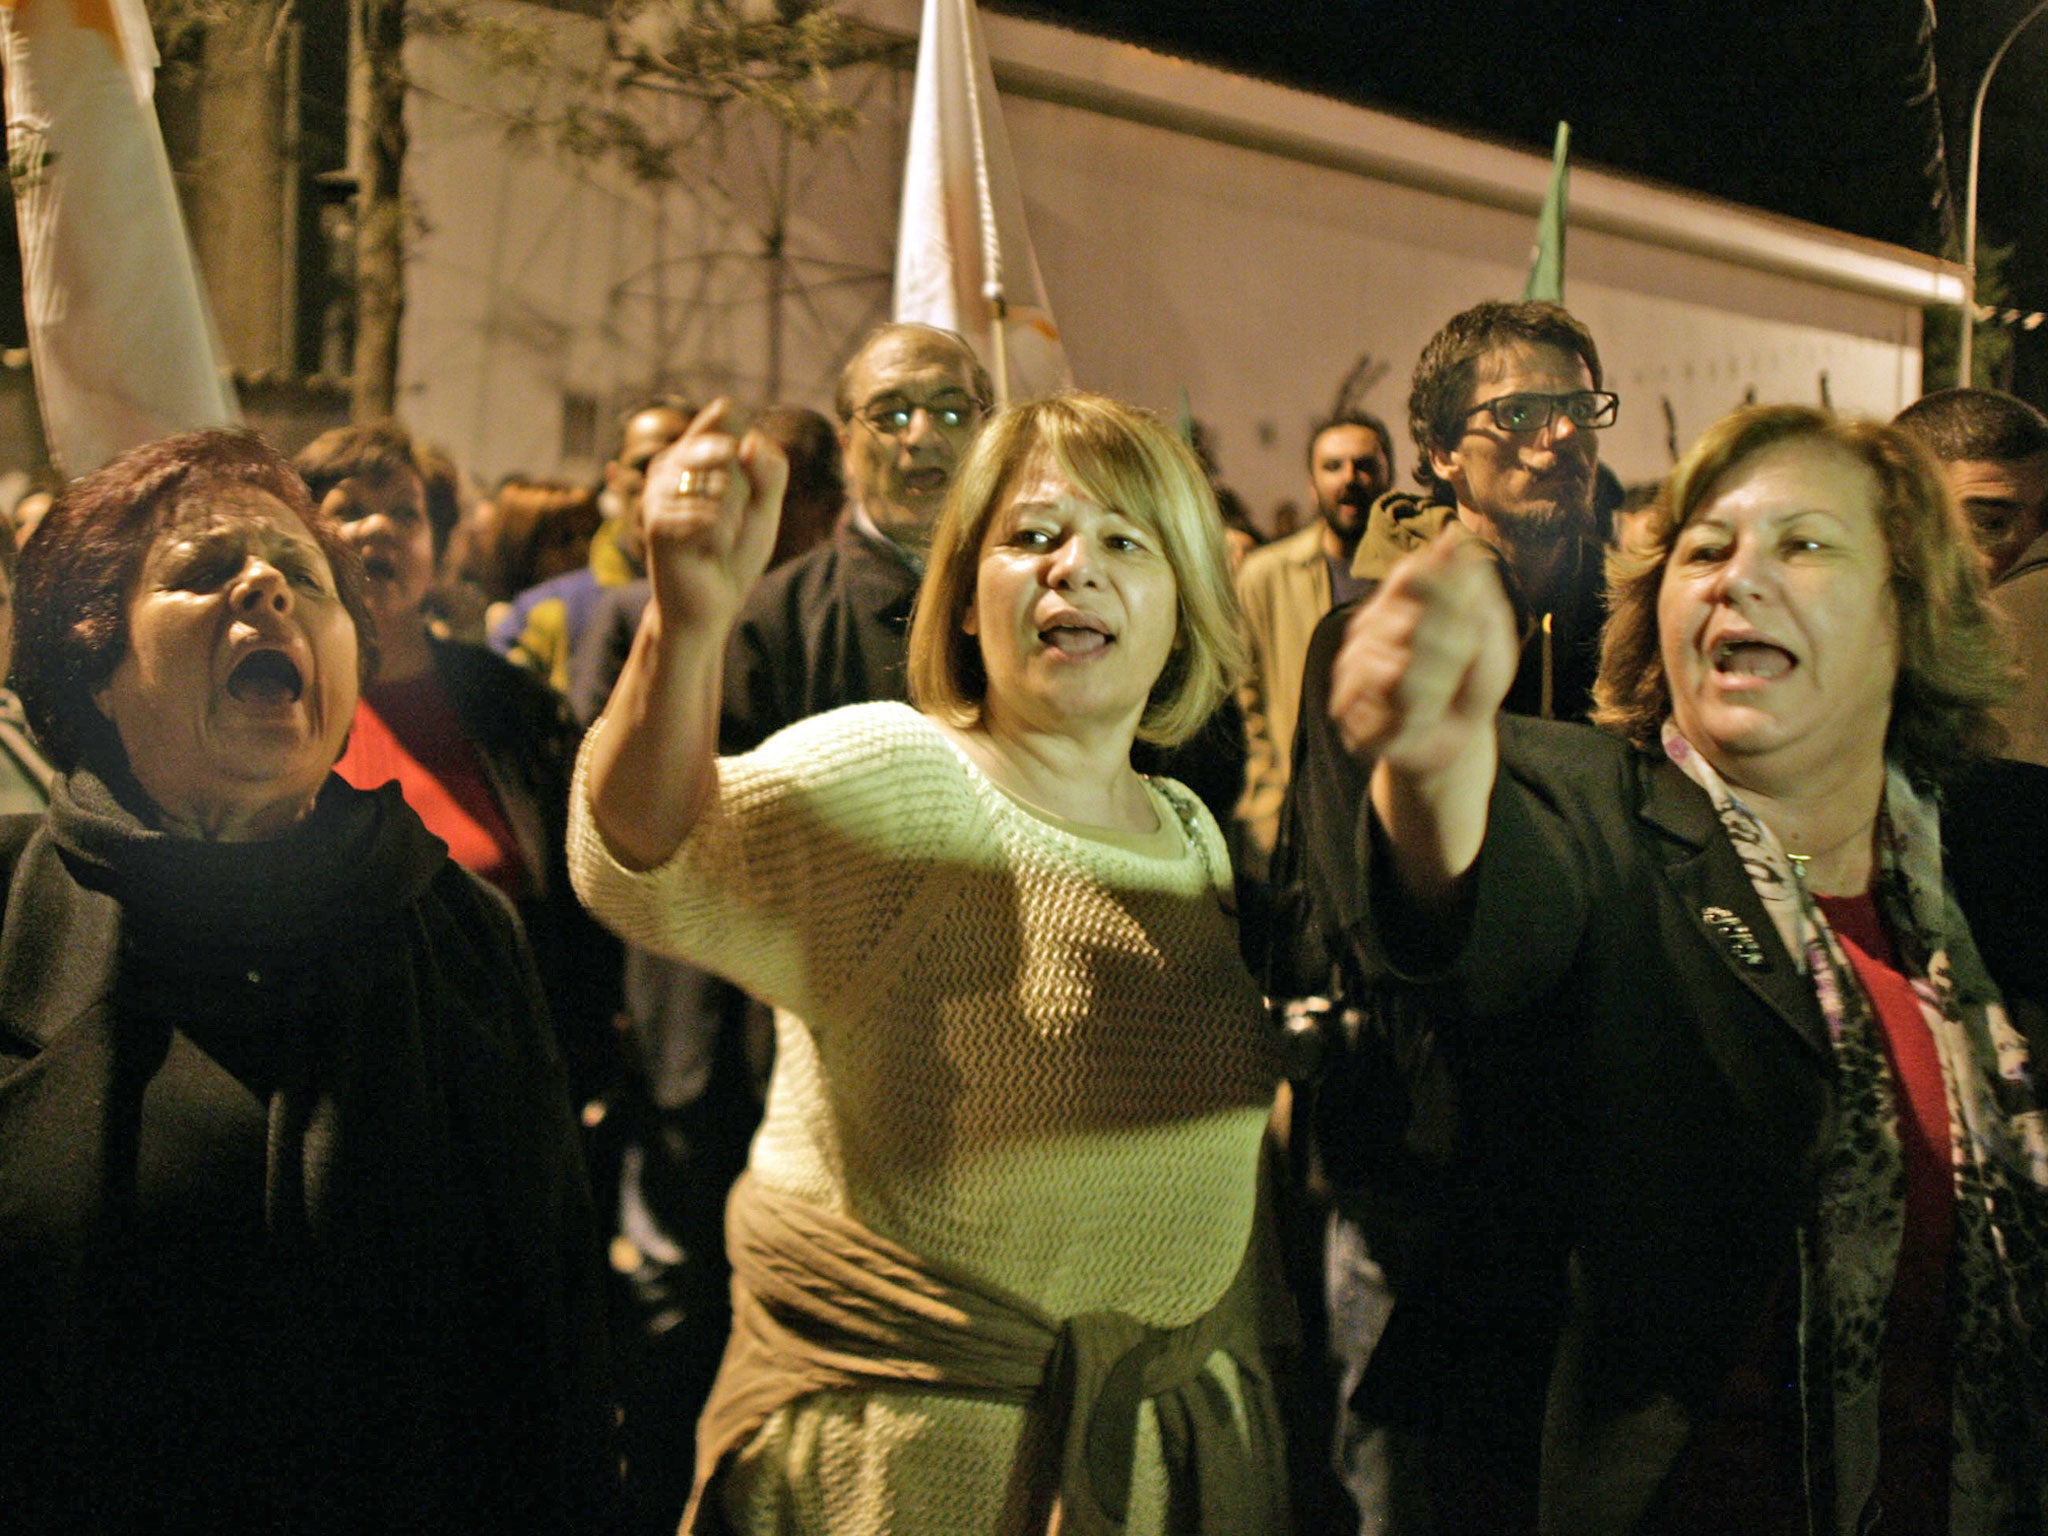 Protestors shout slogans against EU at protest outside a Eurogroup meeting at the European Council building last night